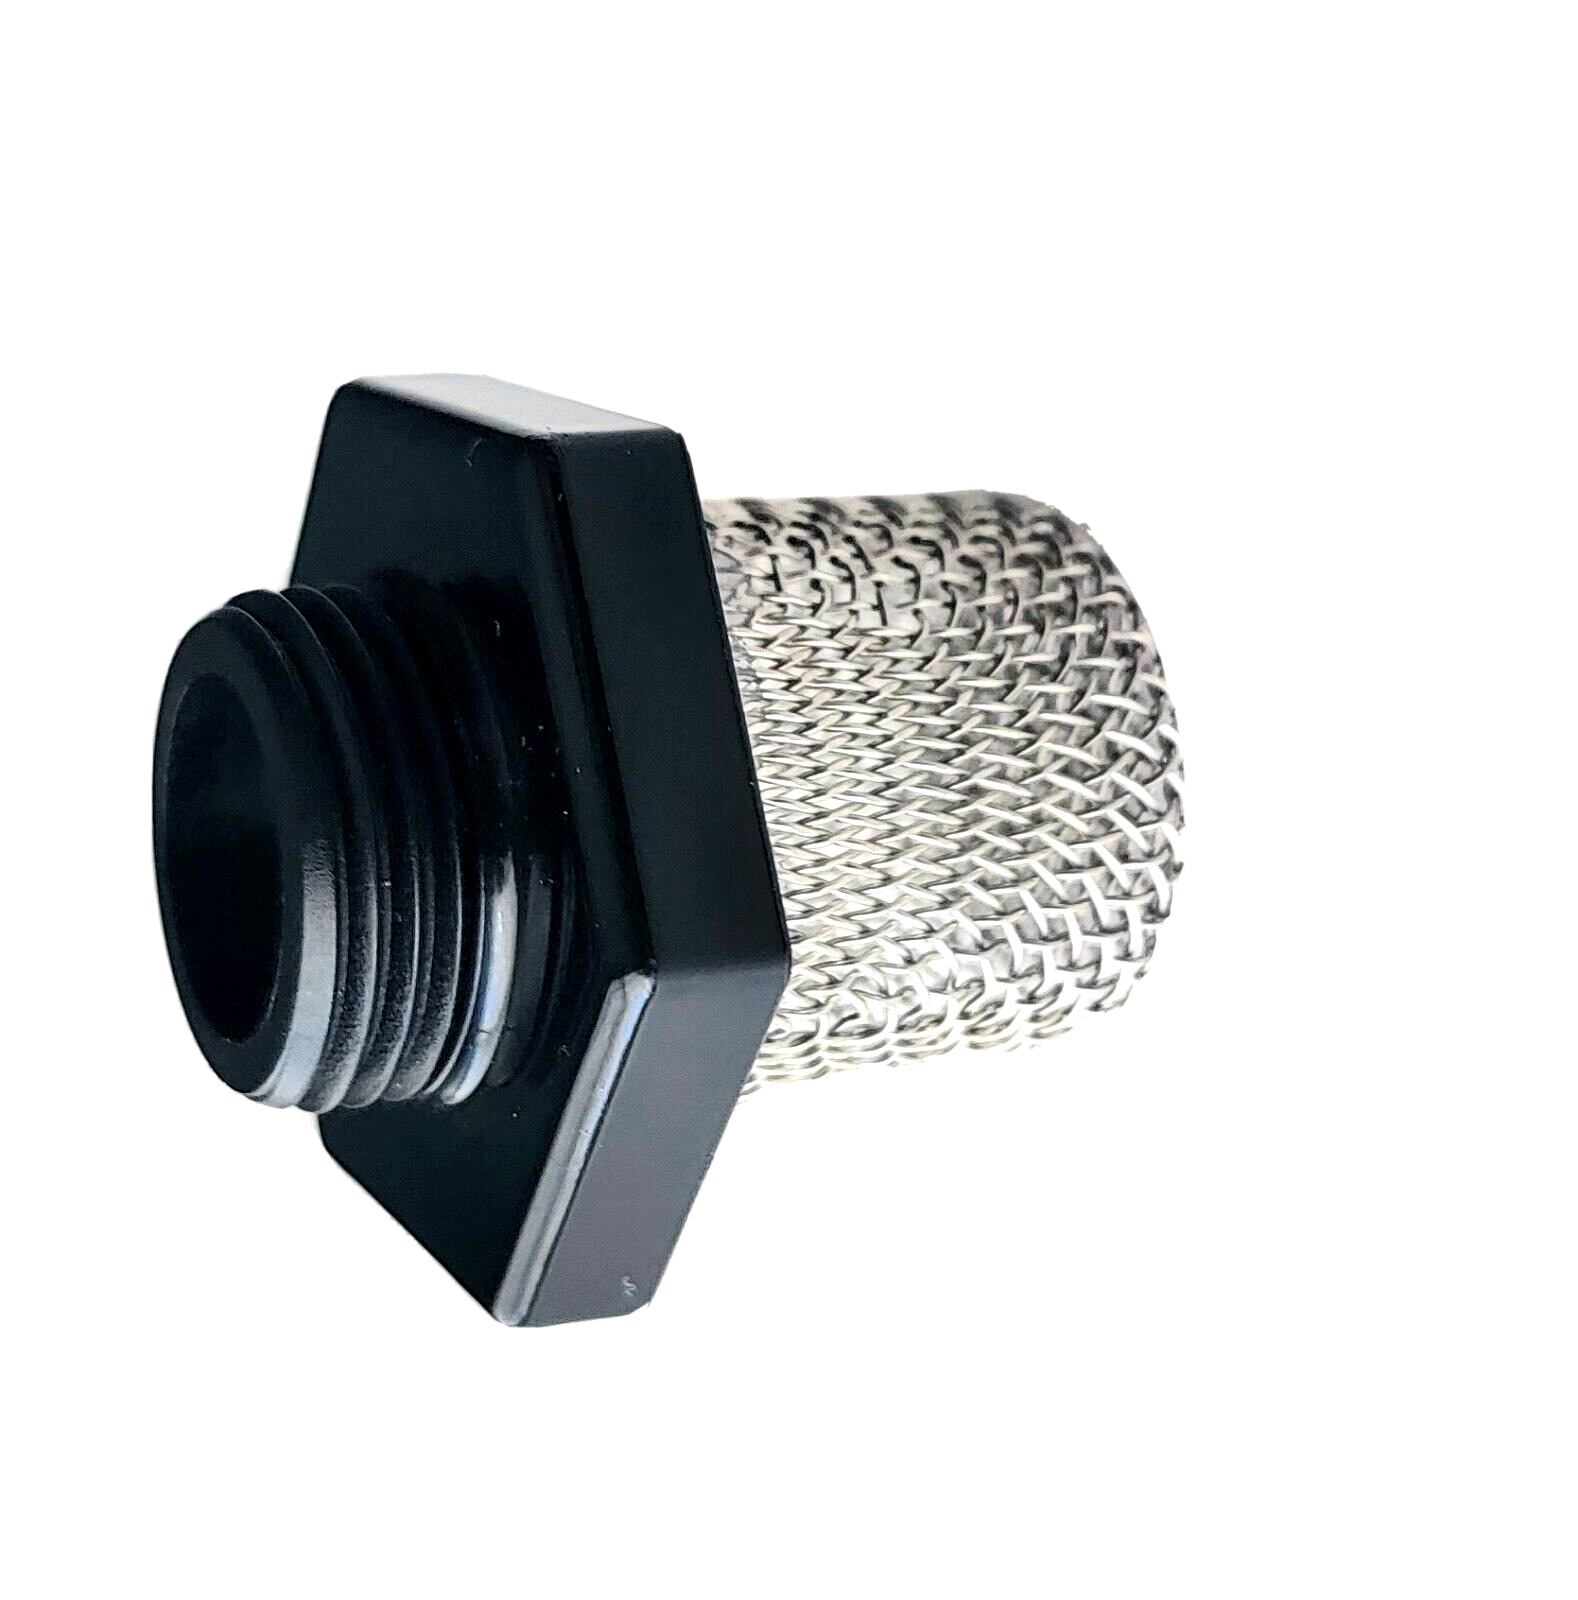 AVANTI Pro Inlet Strainer for Floor Based Airless Paint and Stain Sprayers. 